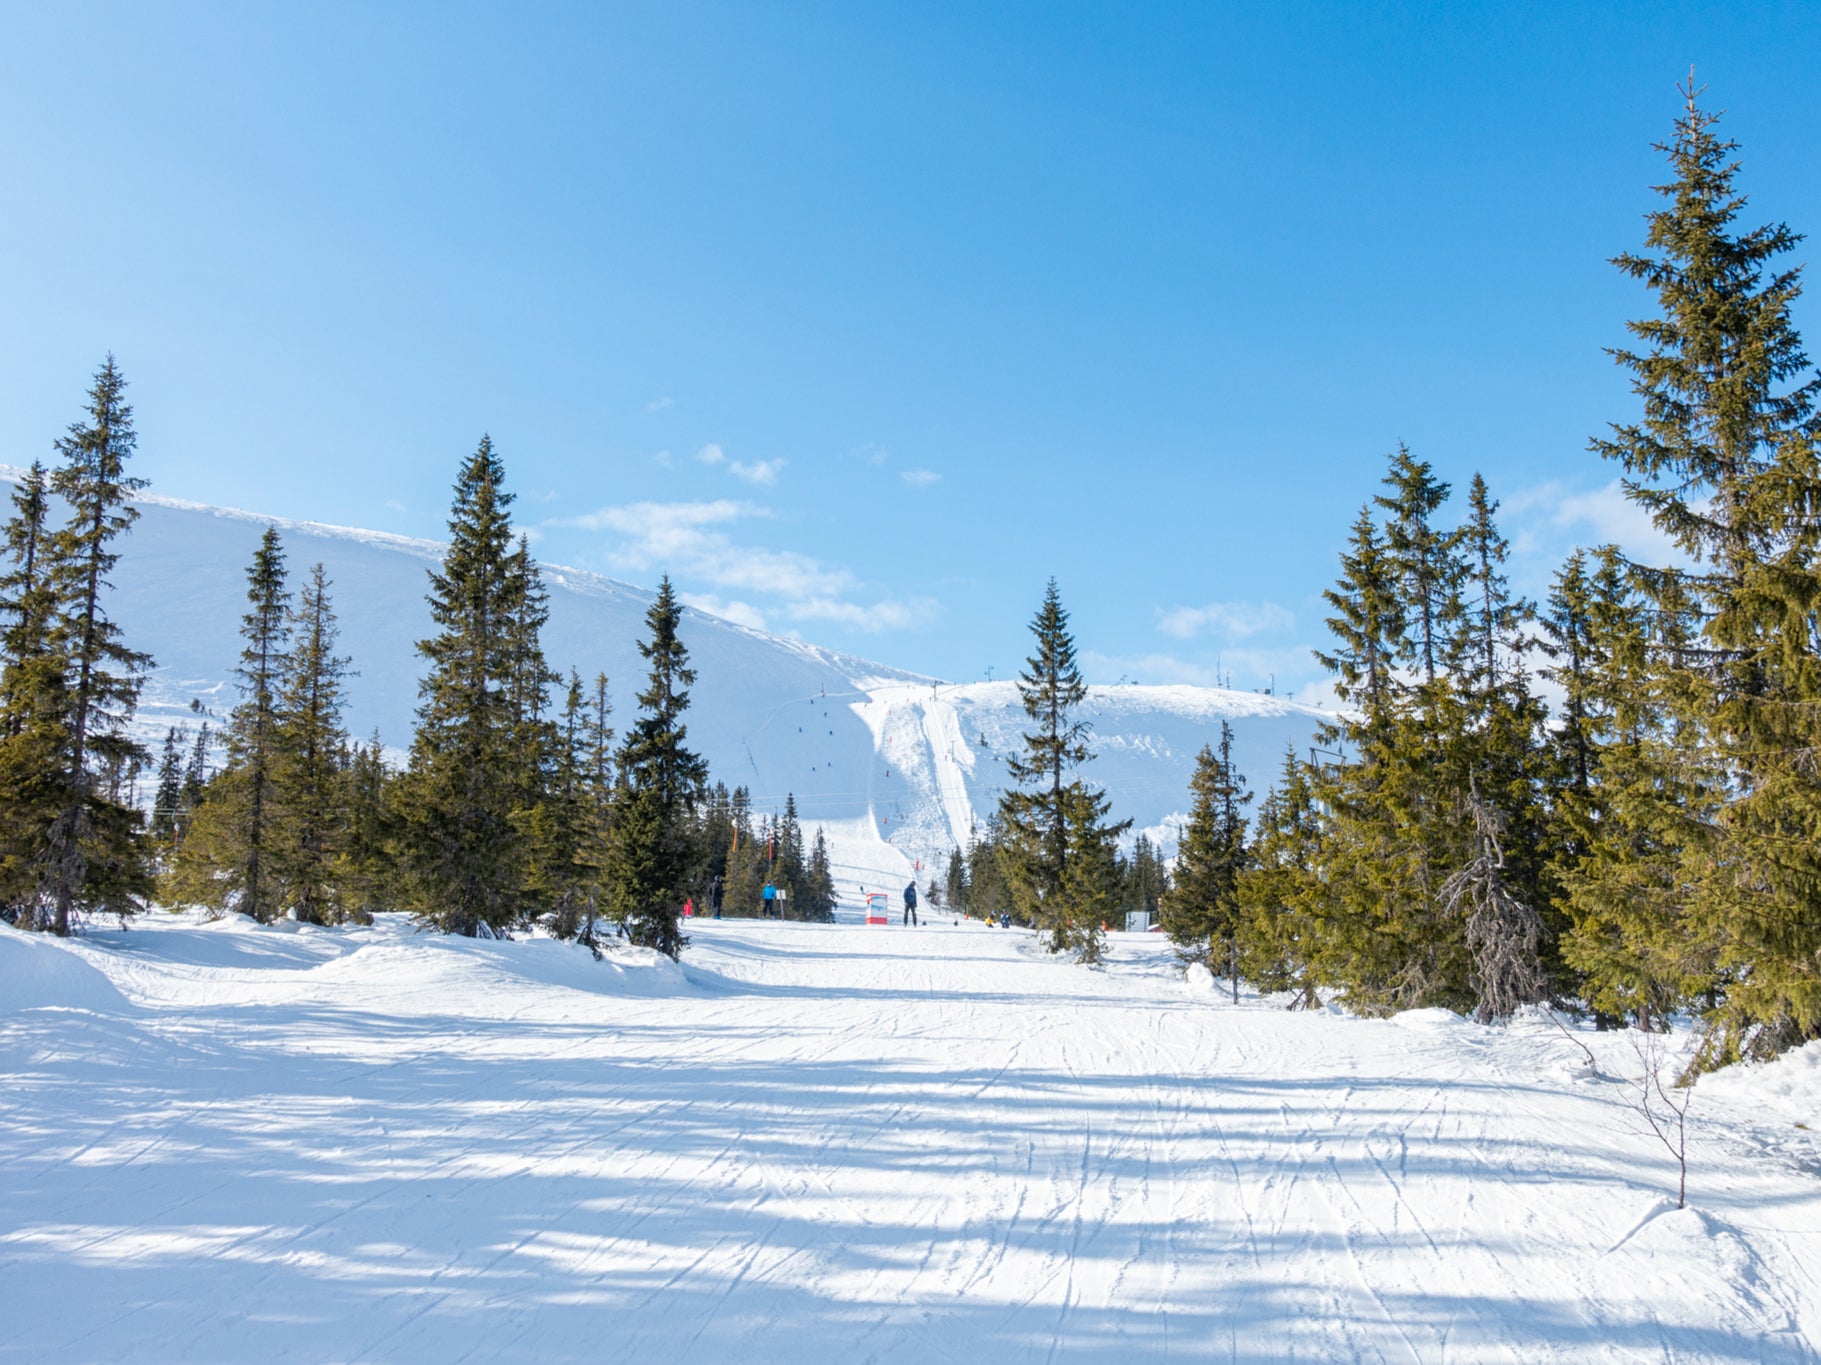 Trysil is the country’s largest ski centre, with 69 slopes and 32 lifts